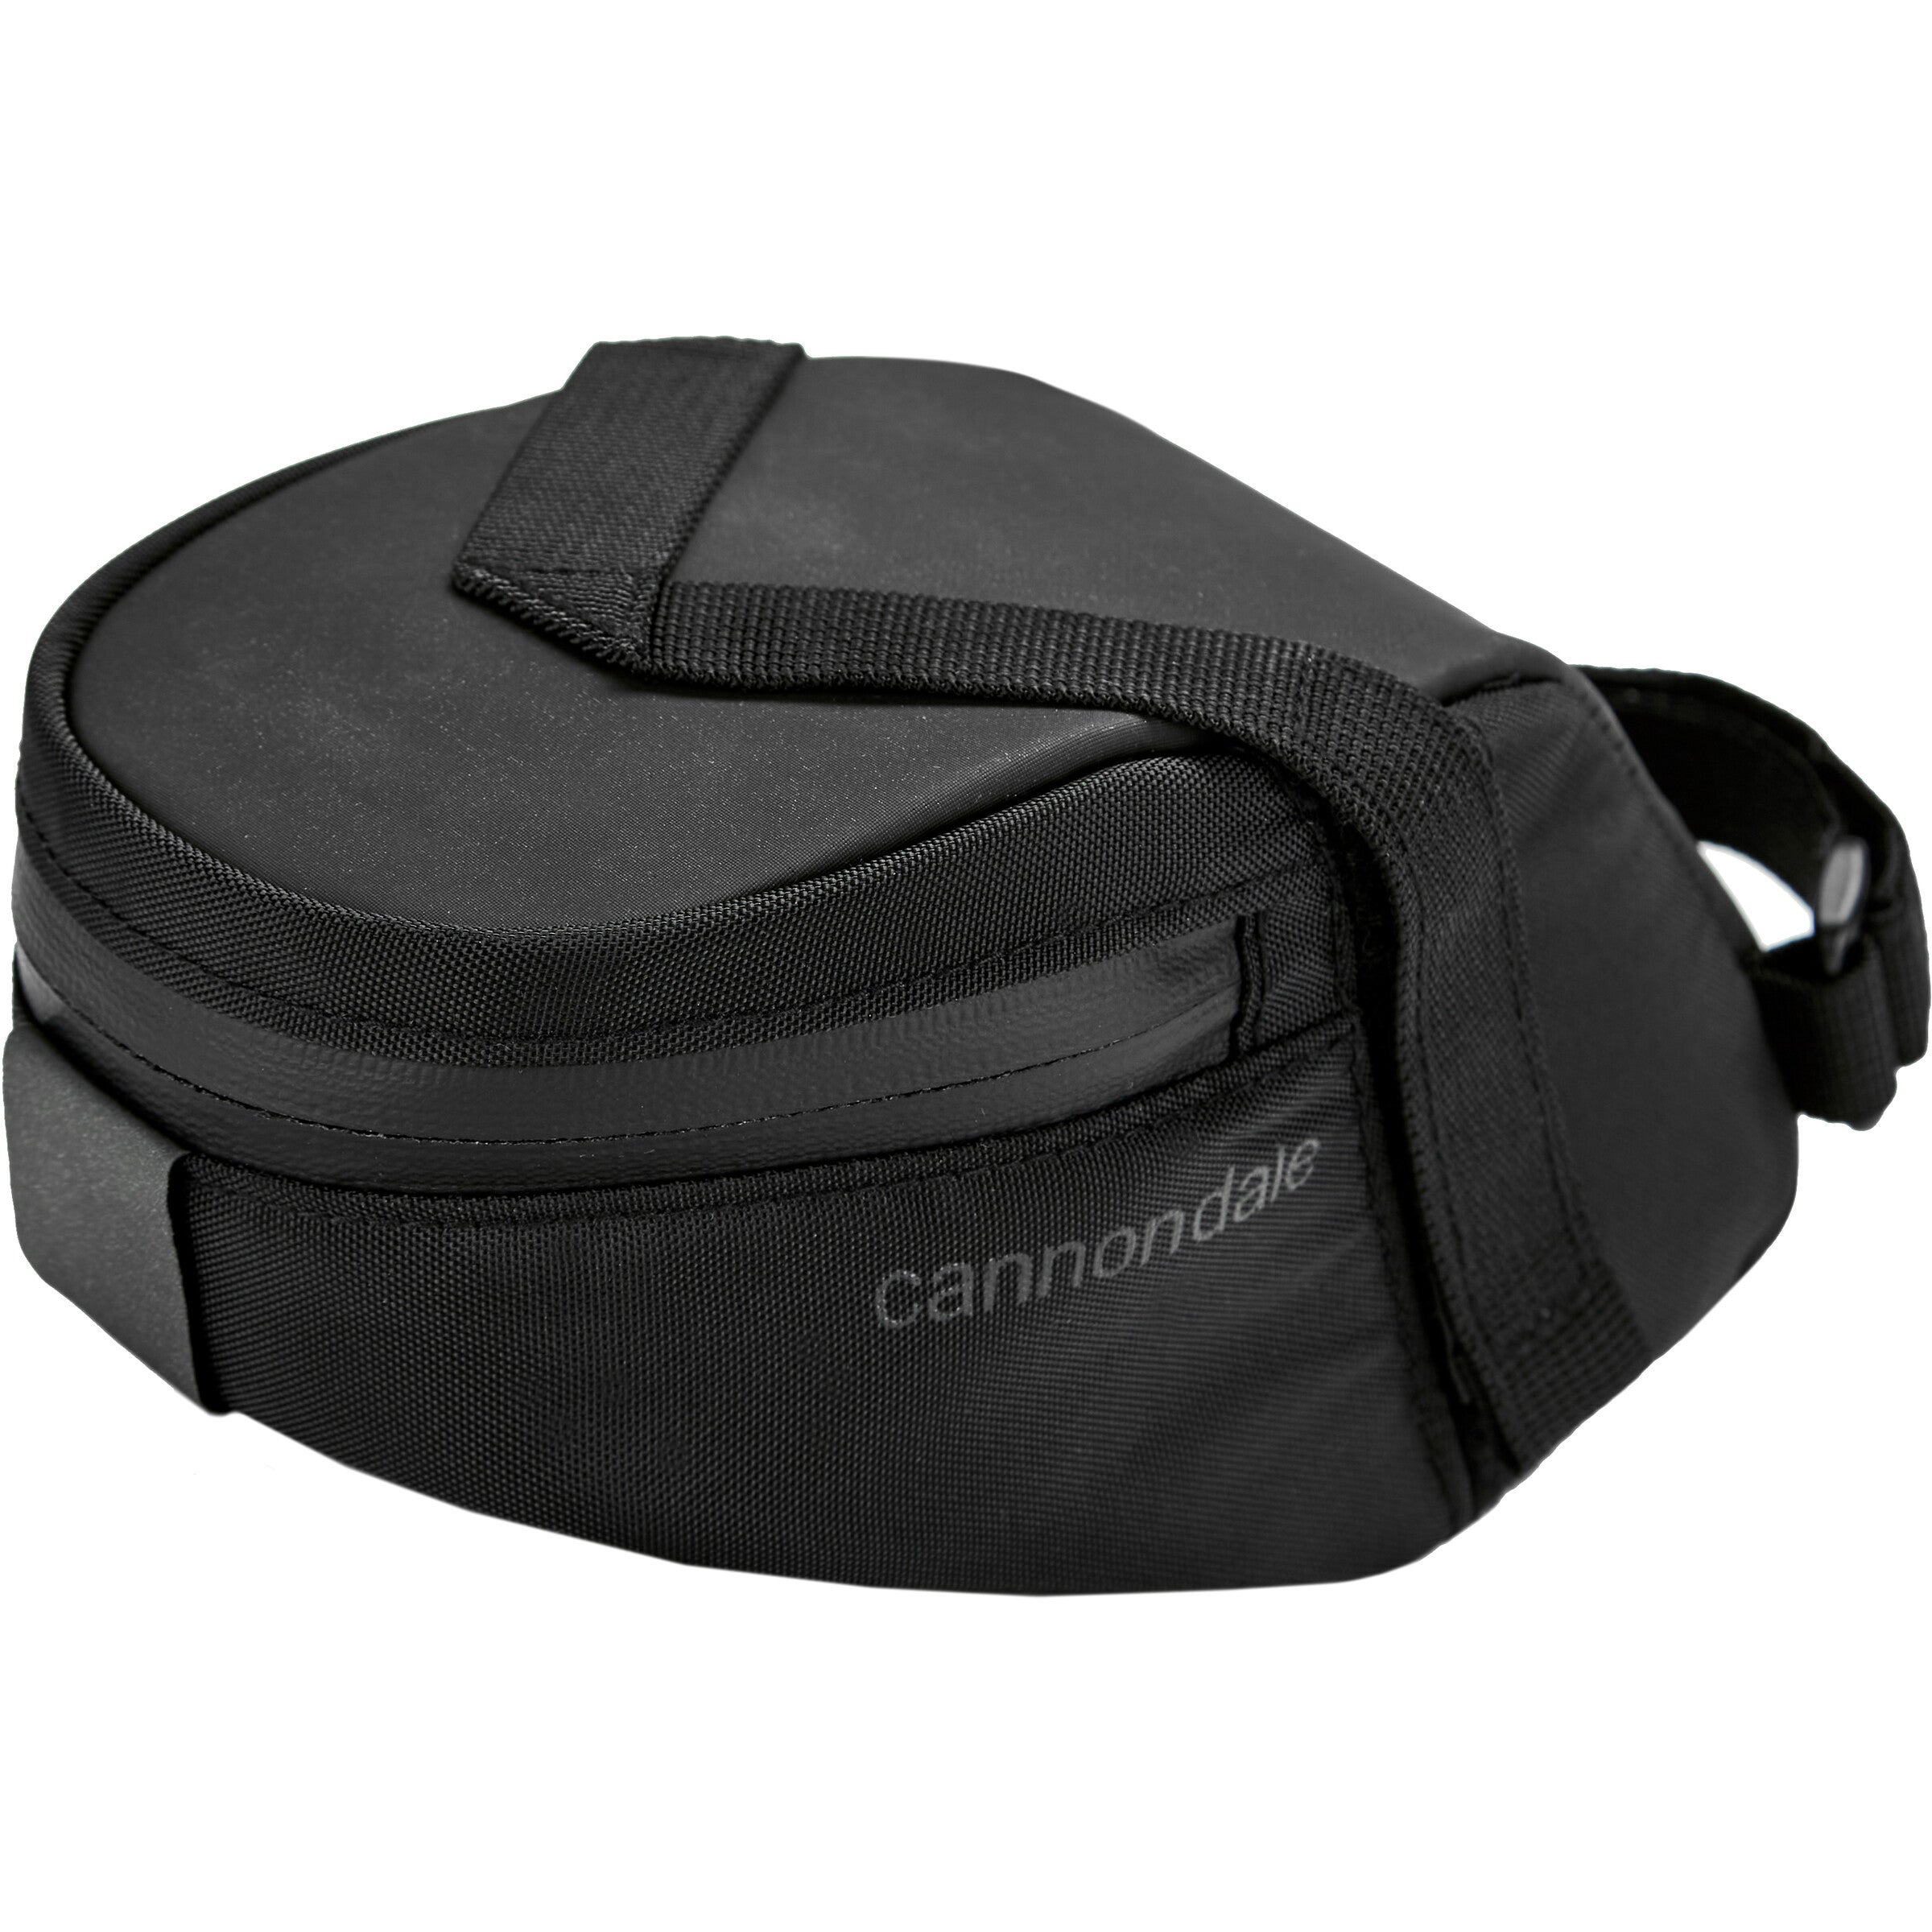 Cannondale Contain Stitched Velcro Satteltasche - Small